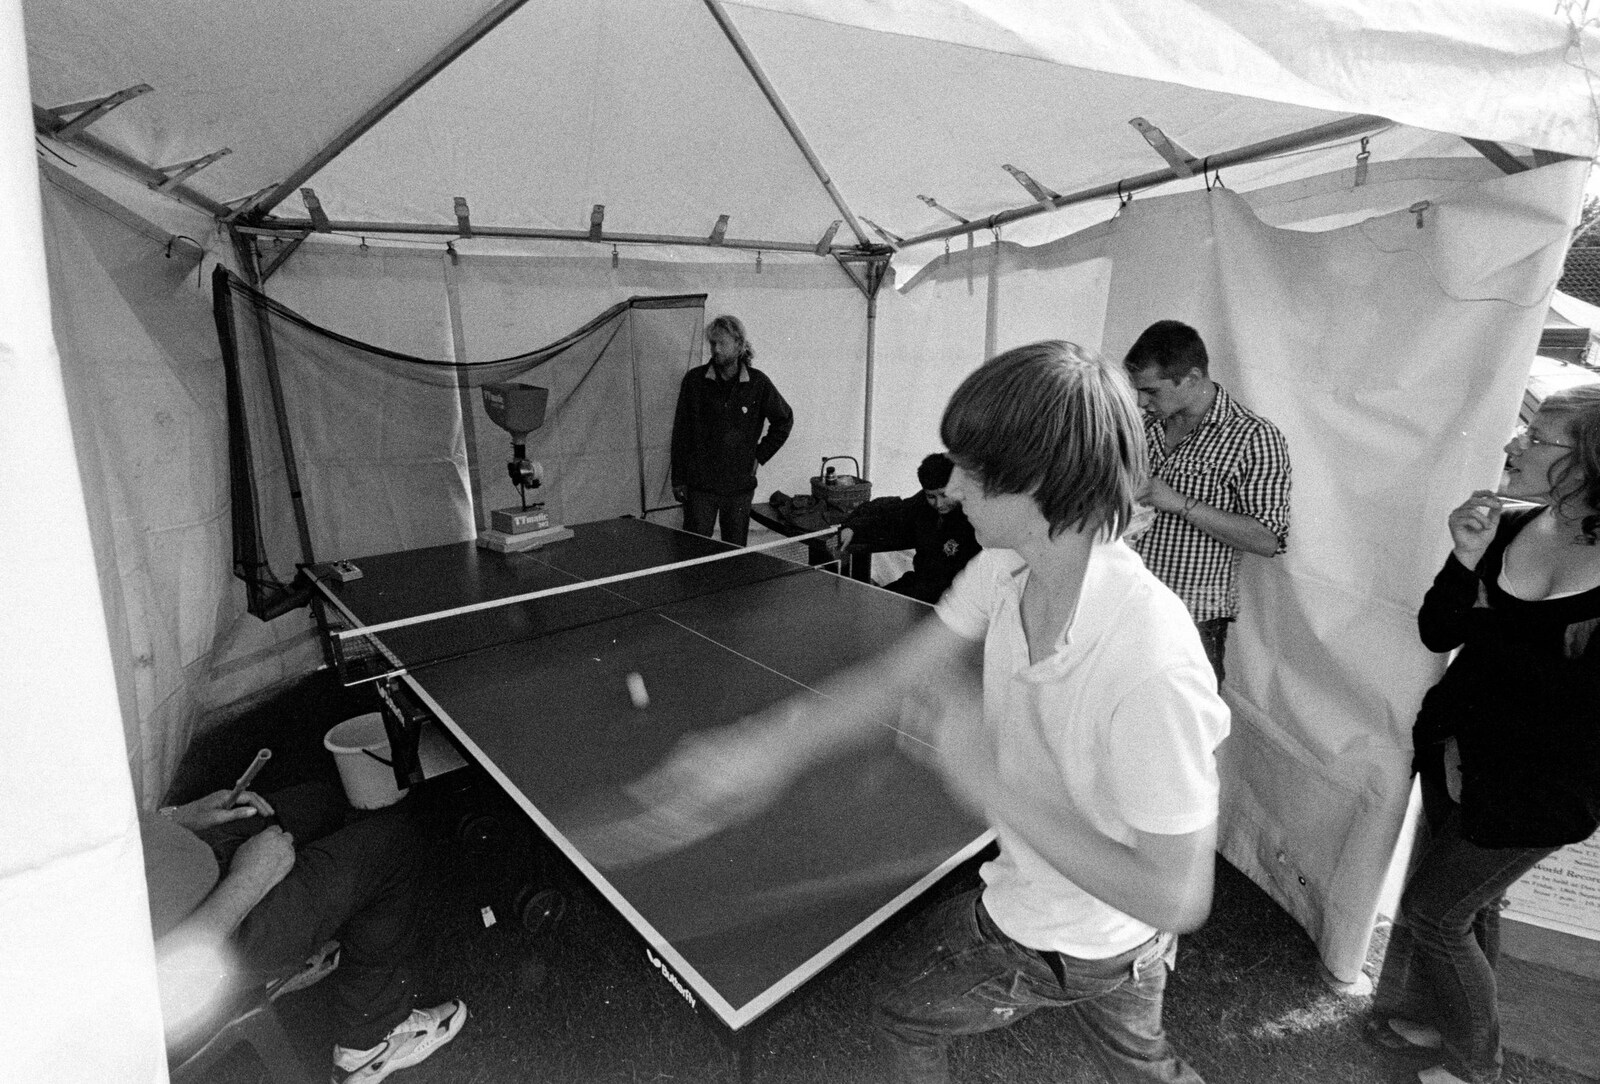 Fred at the Carnival, Brewer's Green Lane, Diss, Norfolk - 21st June 2010: More table-tennis action